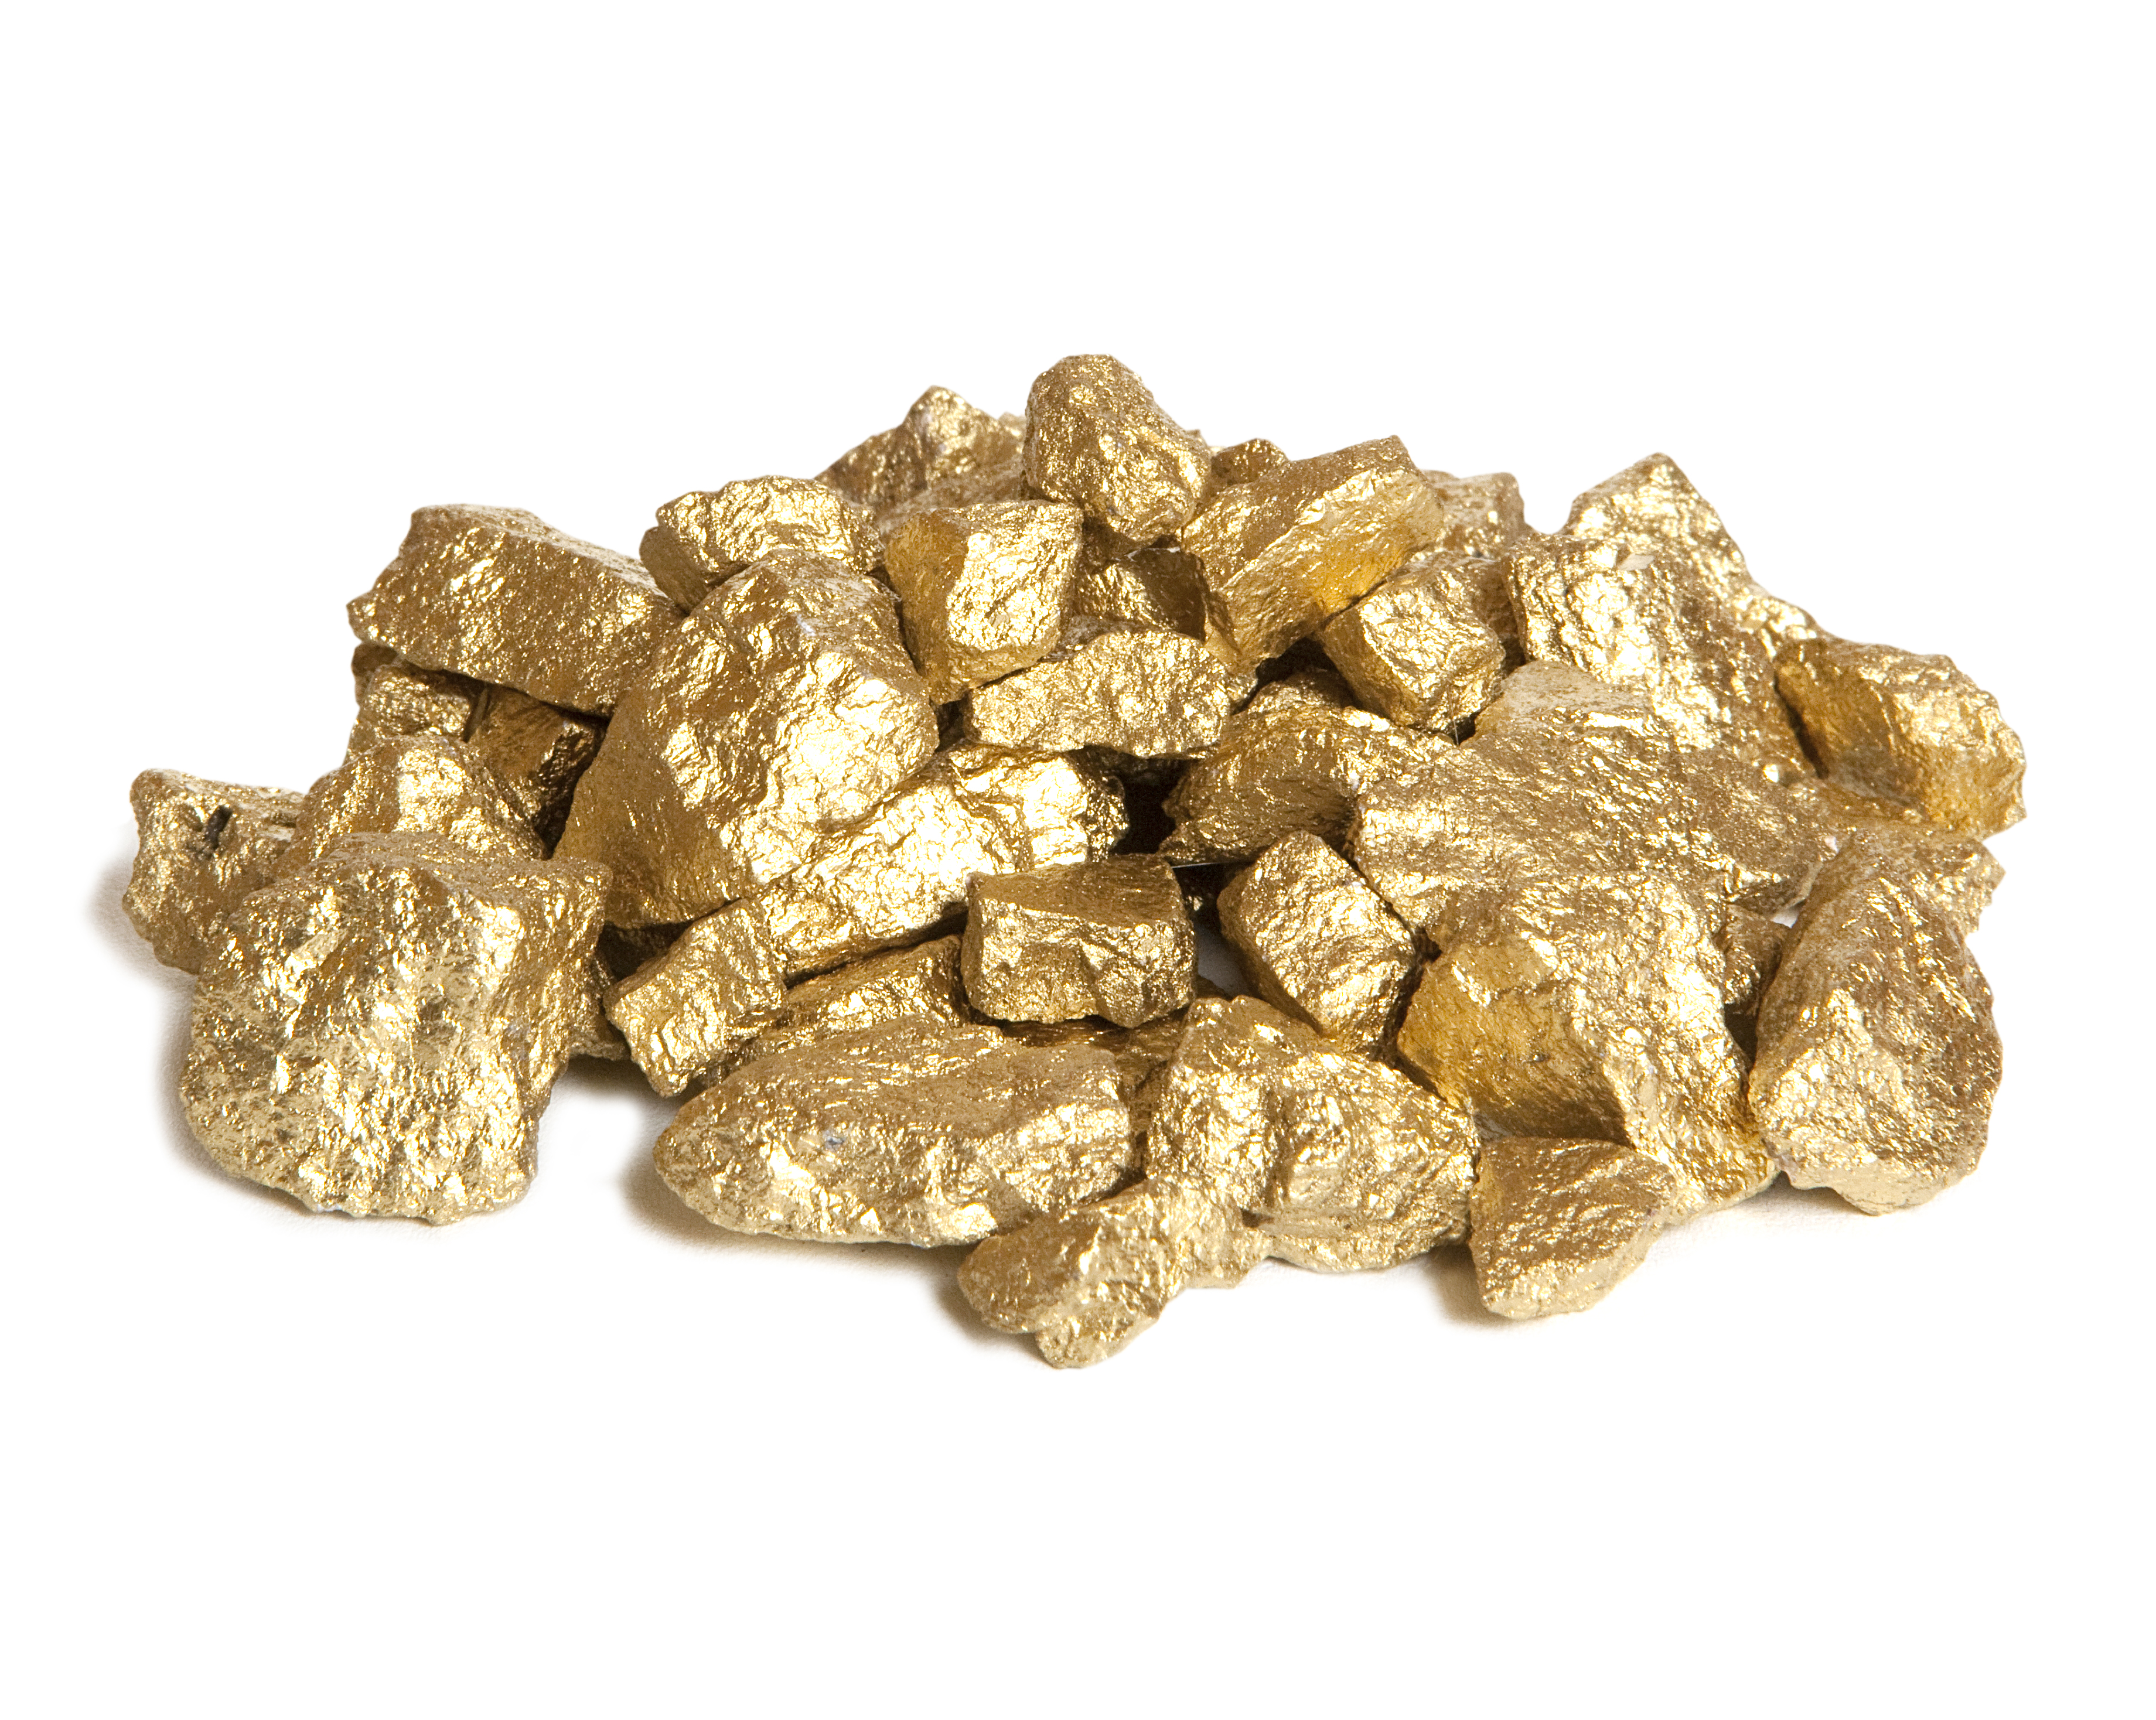 Search for Gold in Summit, County Colorado - Gold Nuggets